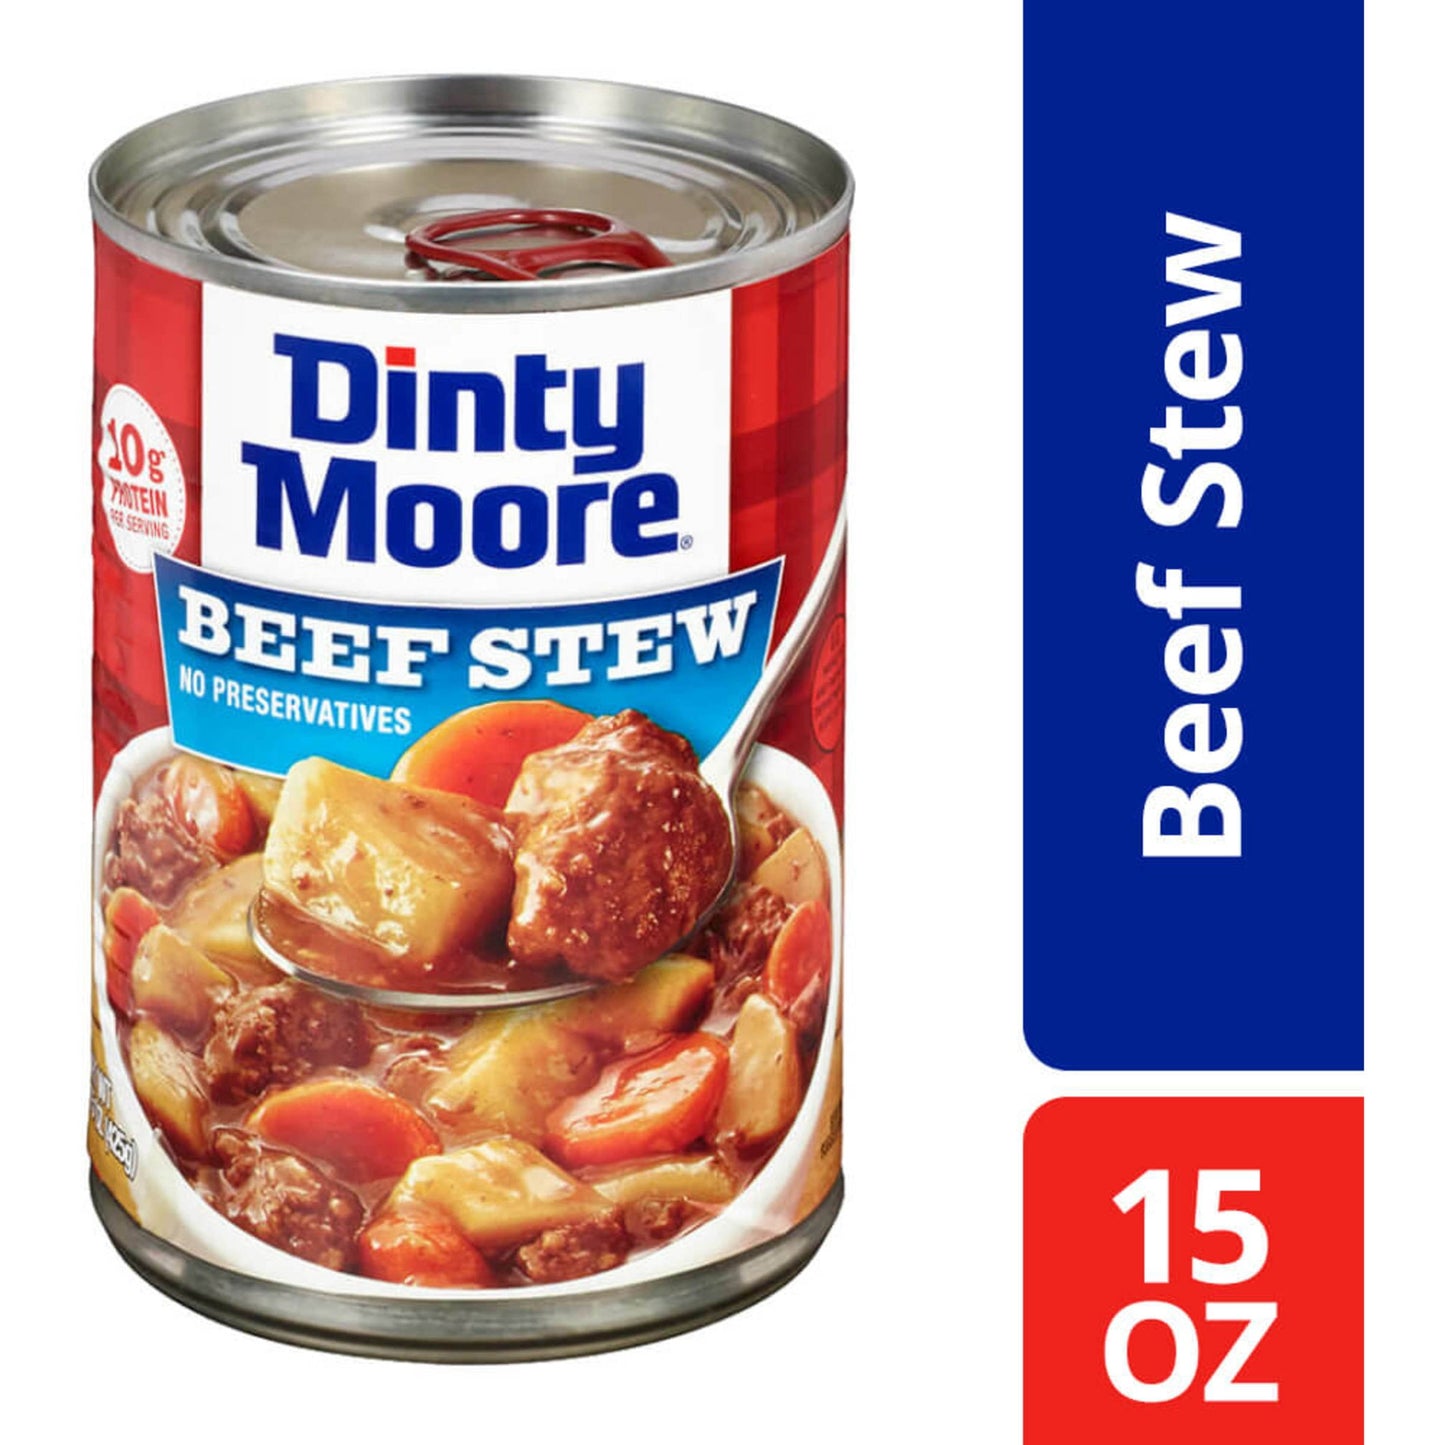 Beef Stew, Shelf Stable, 15 Oz Steel Can (Pack of 4)